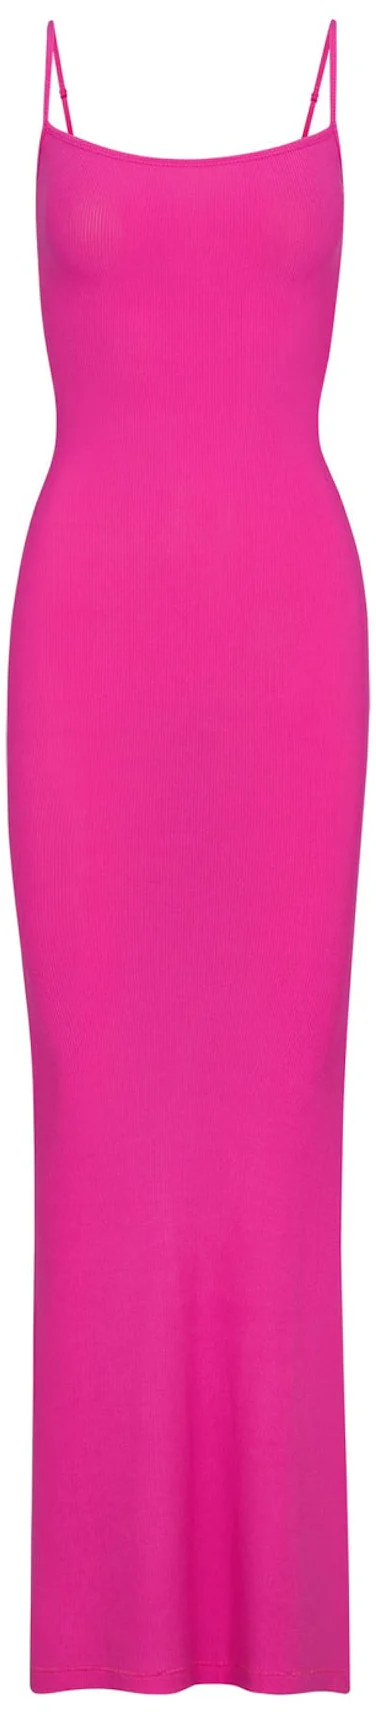 discounted store‎ Medium LIMITED EDITION SKIMS RASPBERRY PINK